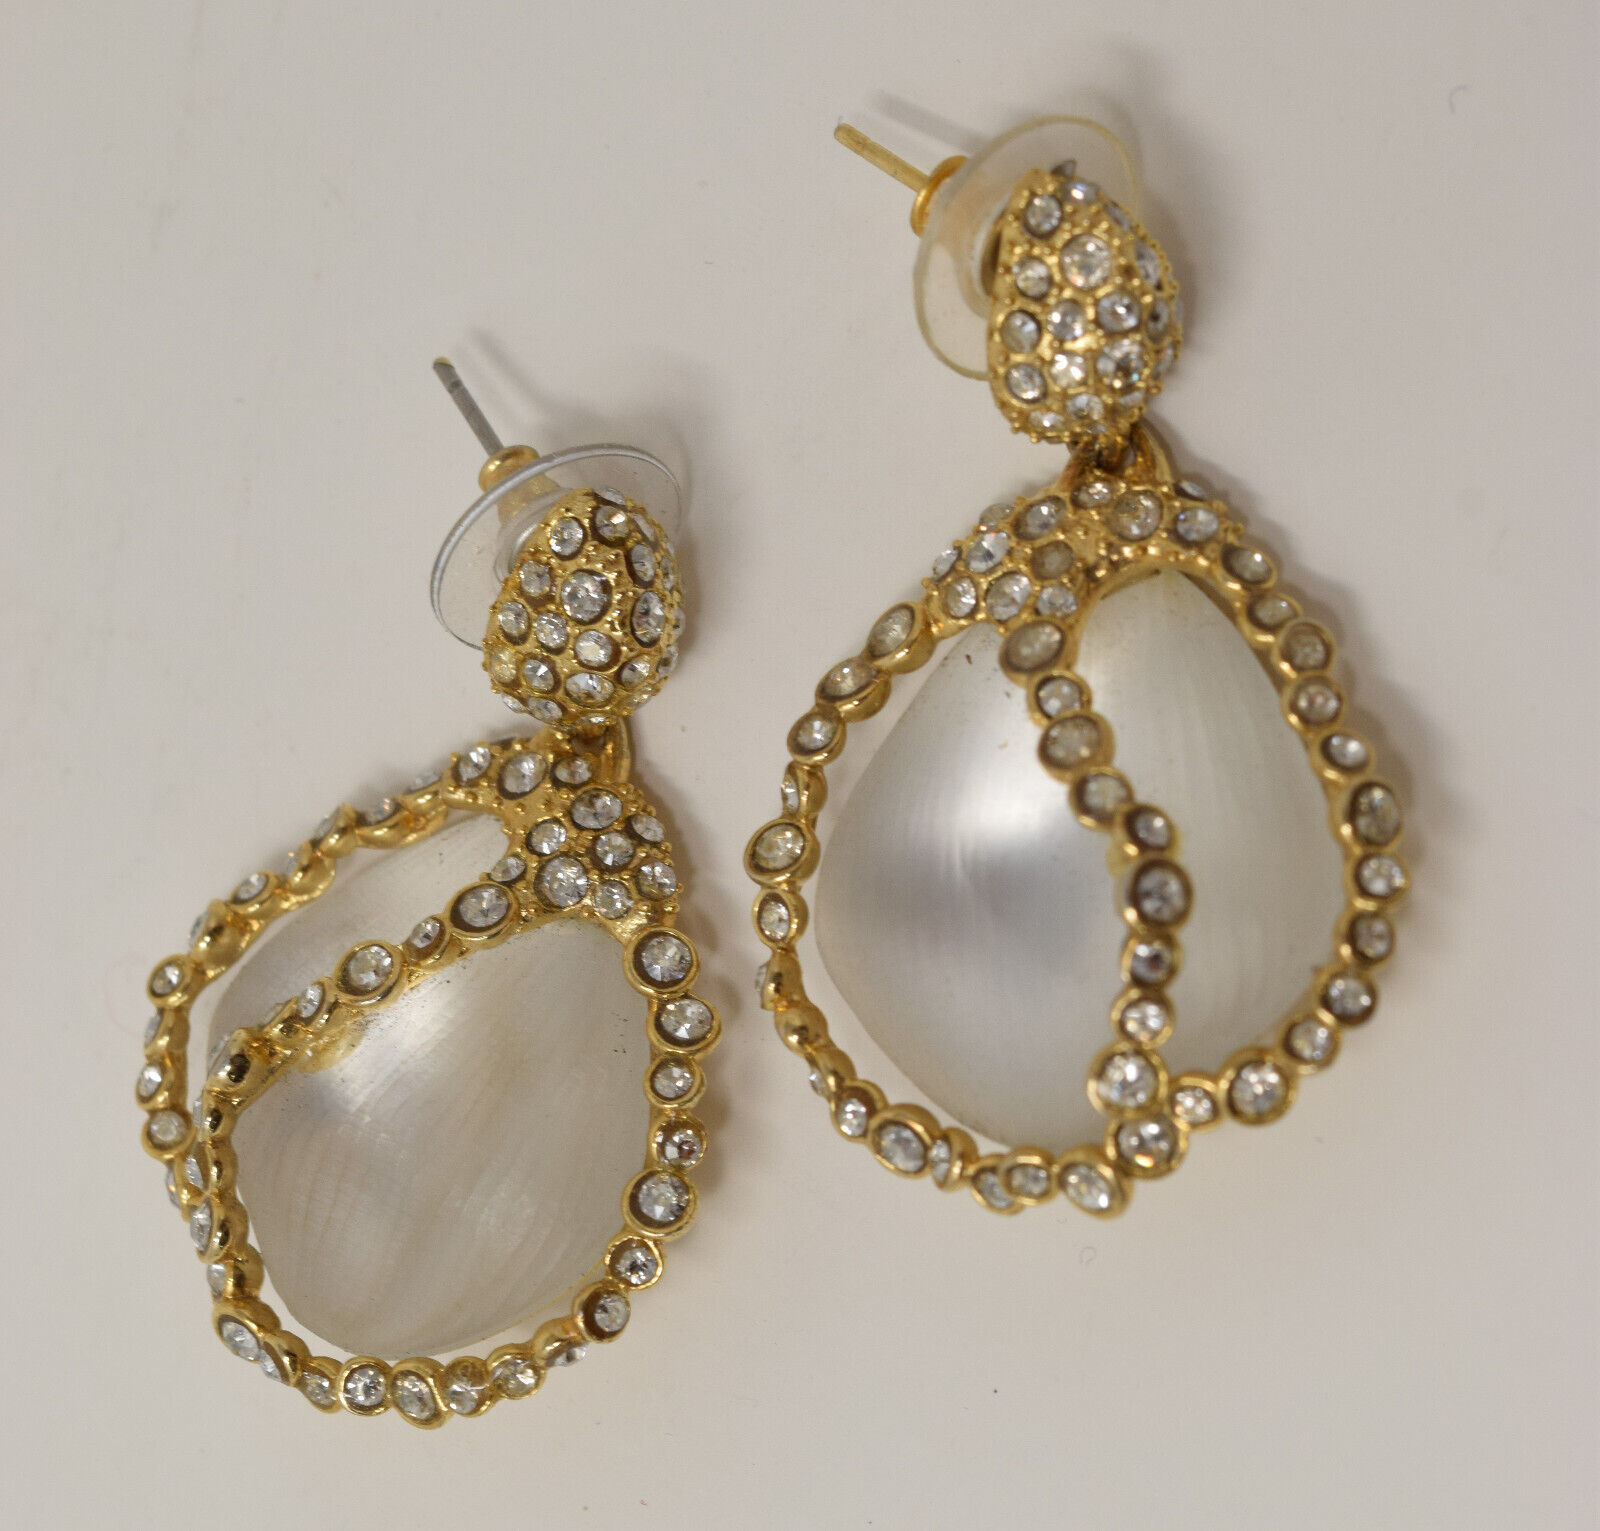 Primary image for Alexis Bittar Lucite and Crystals Tear Drop Earrings